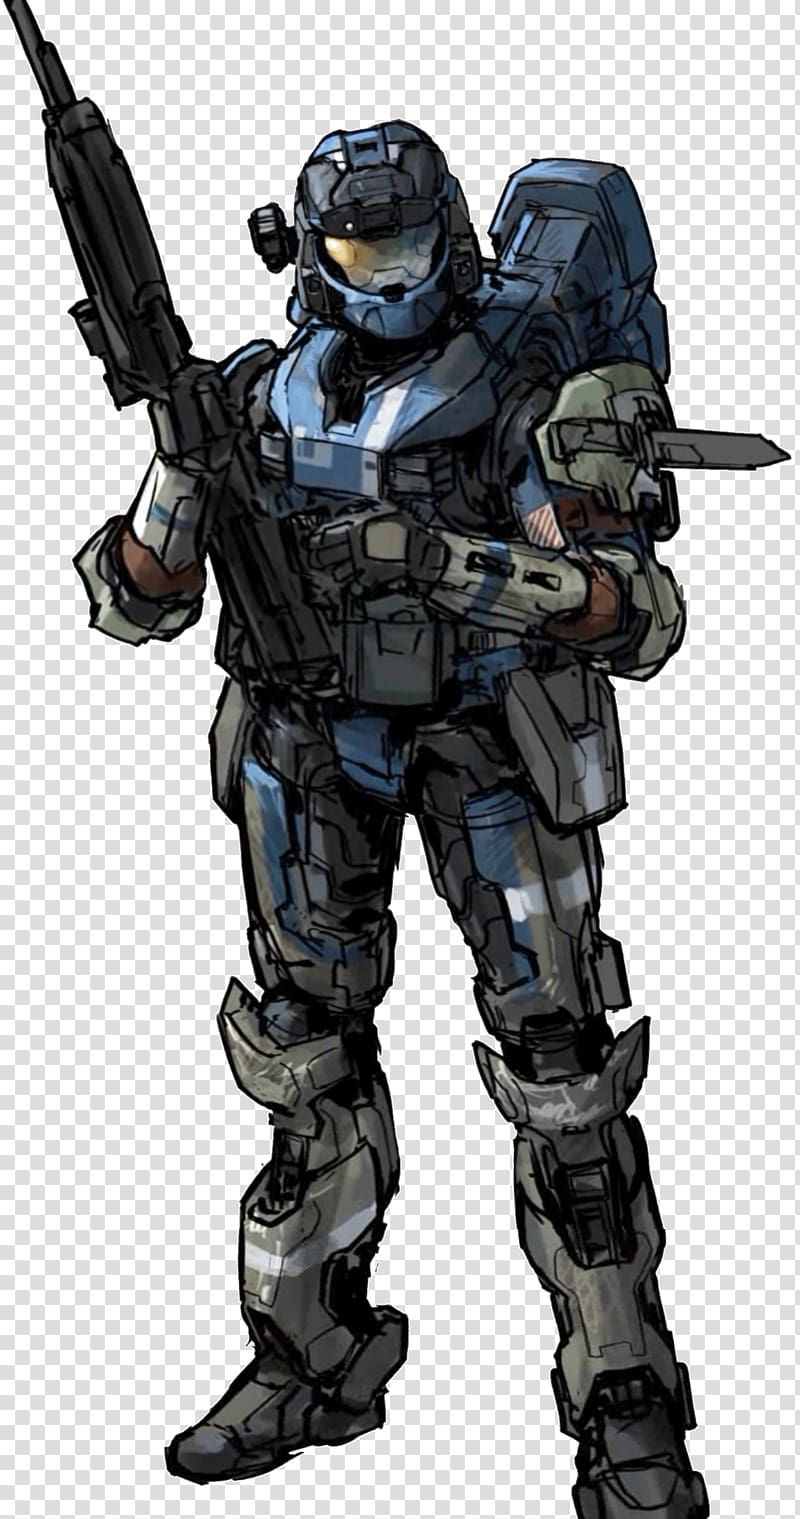 Halo: Reach Halo 3: ODST Halo: Combat Evolved Halo 2 Halo 4, halo wars transparent background PNG clipart